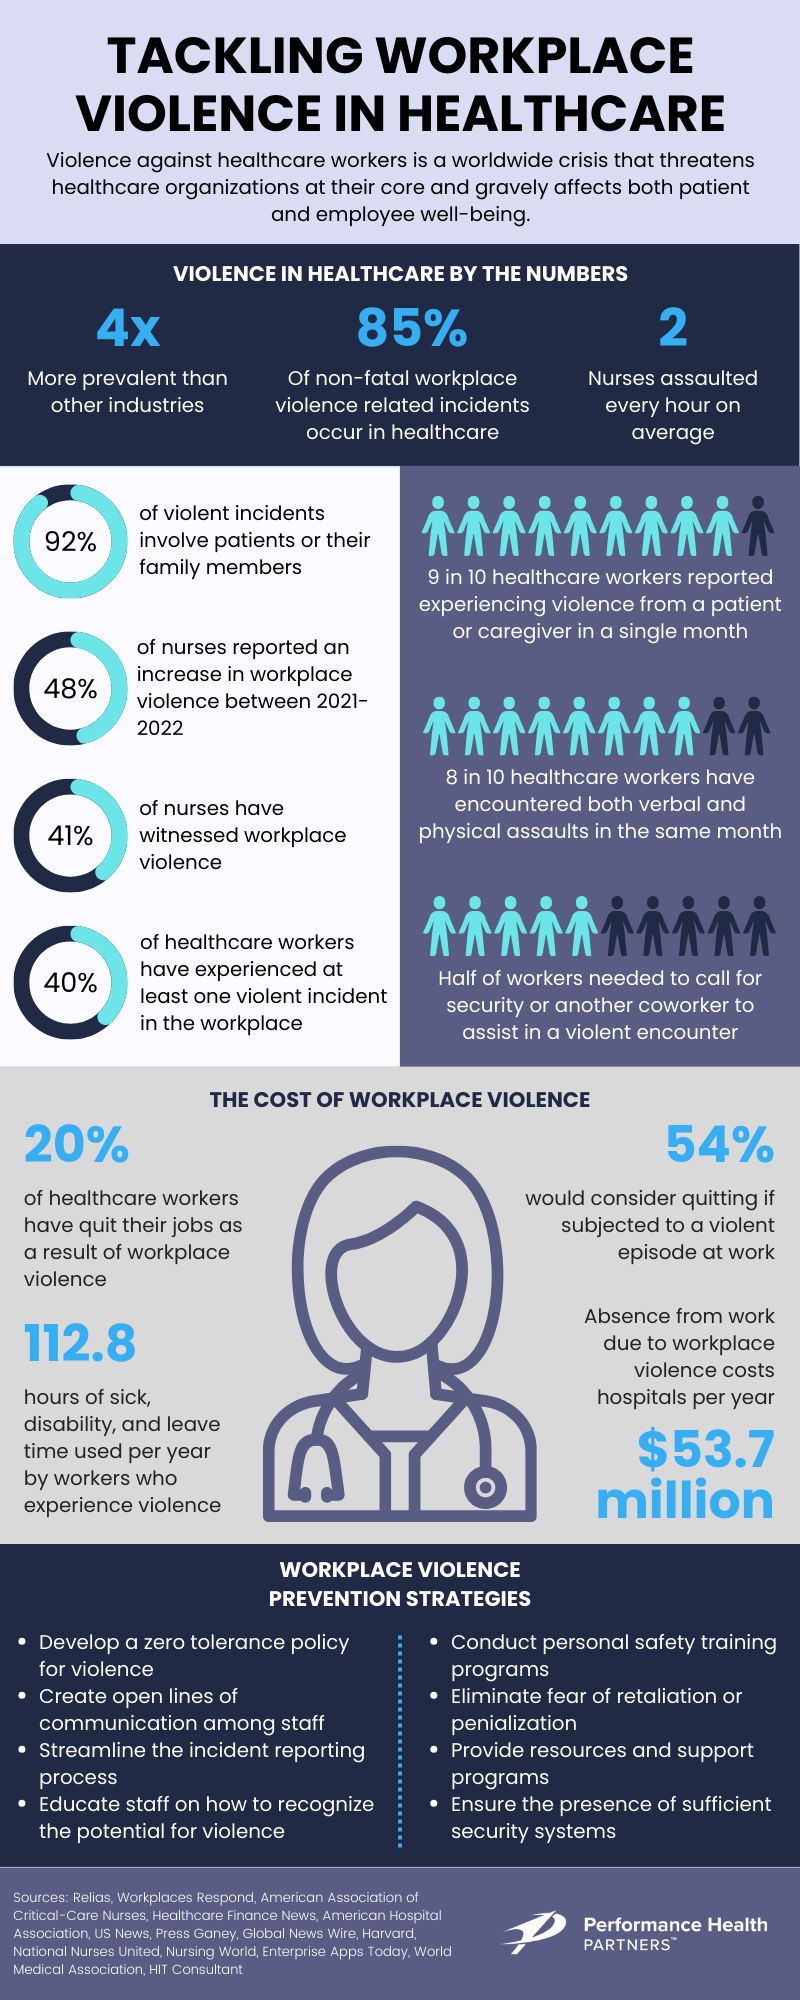 Workplace Violence in Healthcare Infographic